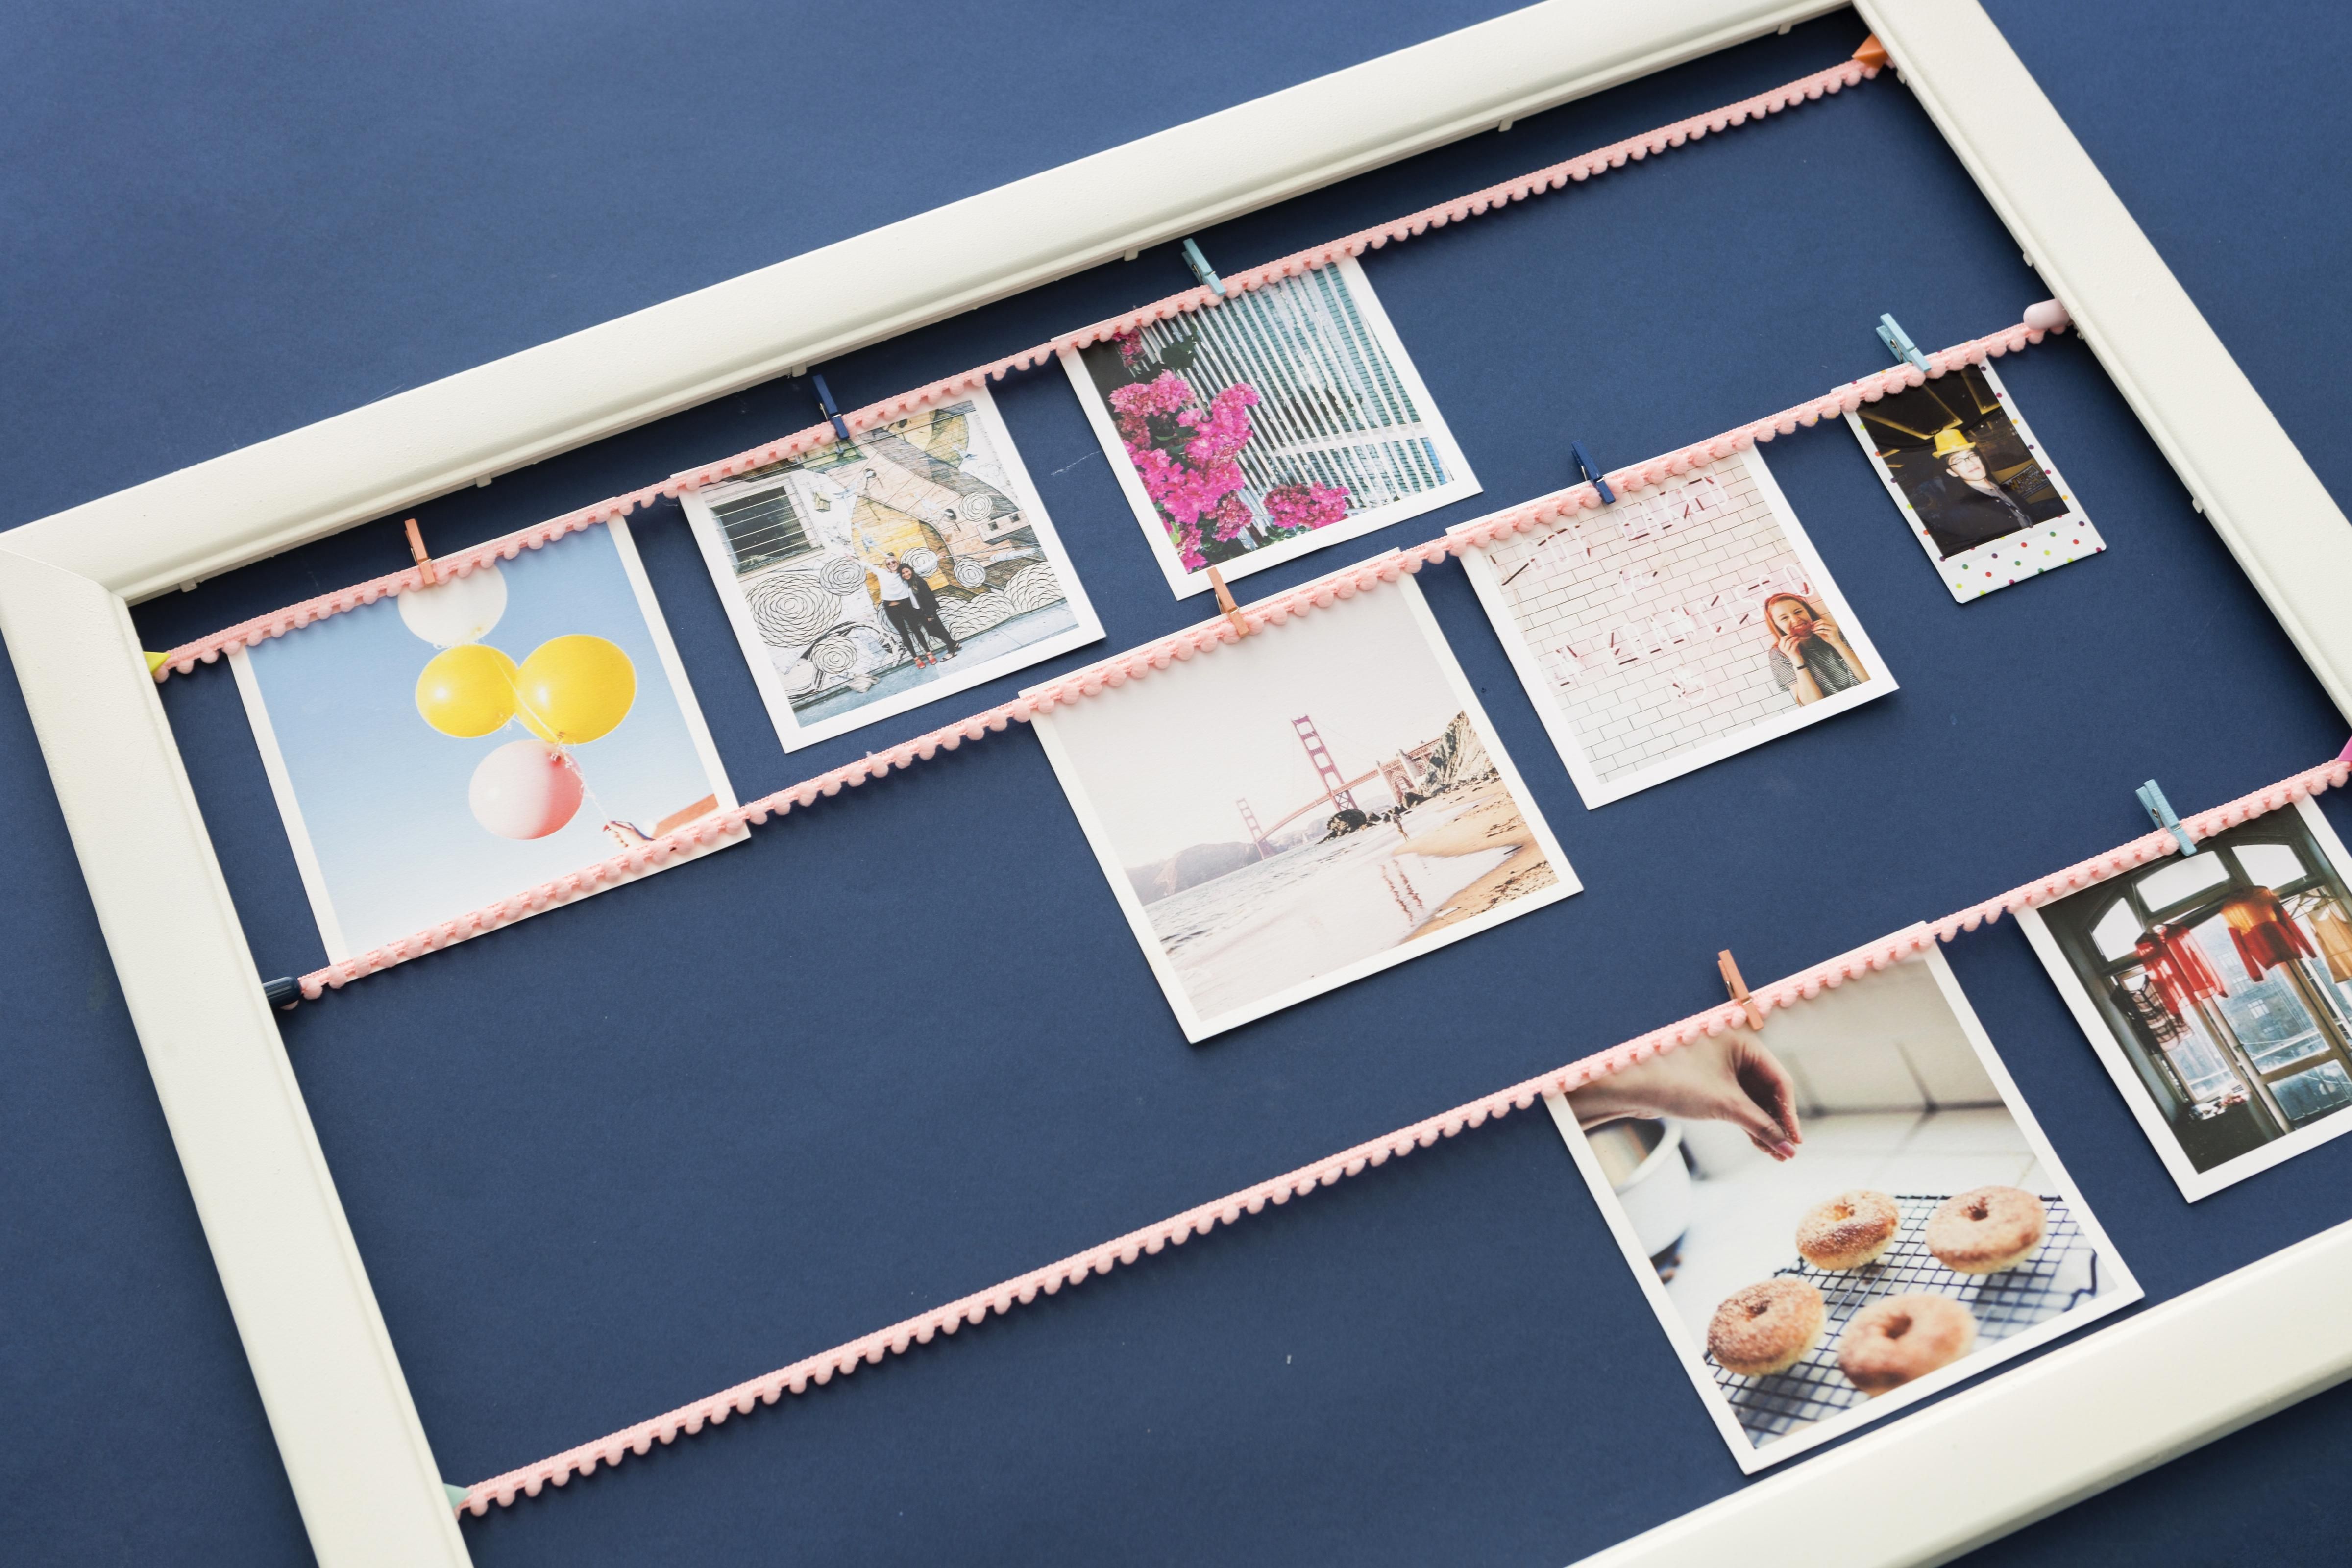 How To Create a Vision Board for Your Business: 8 Step Guide (2024)